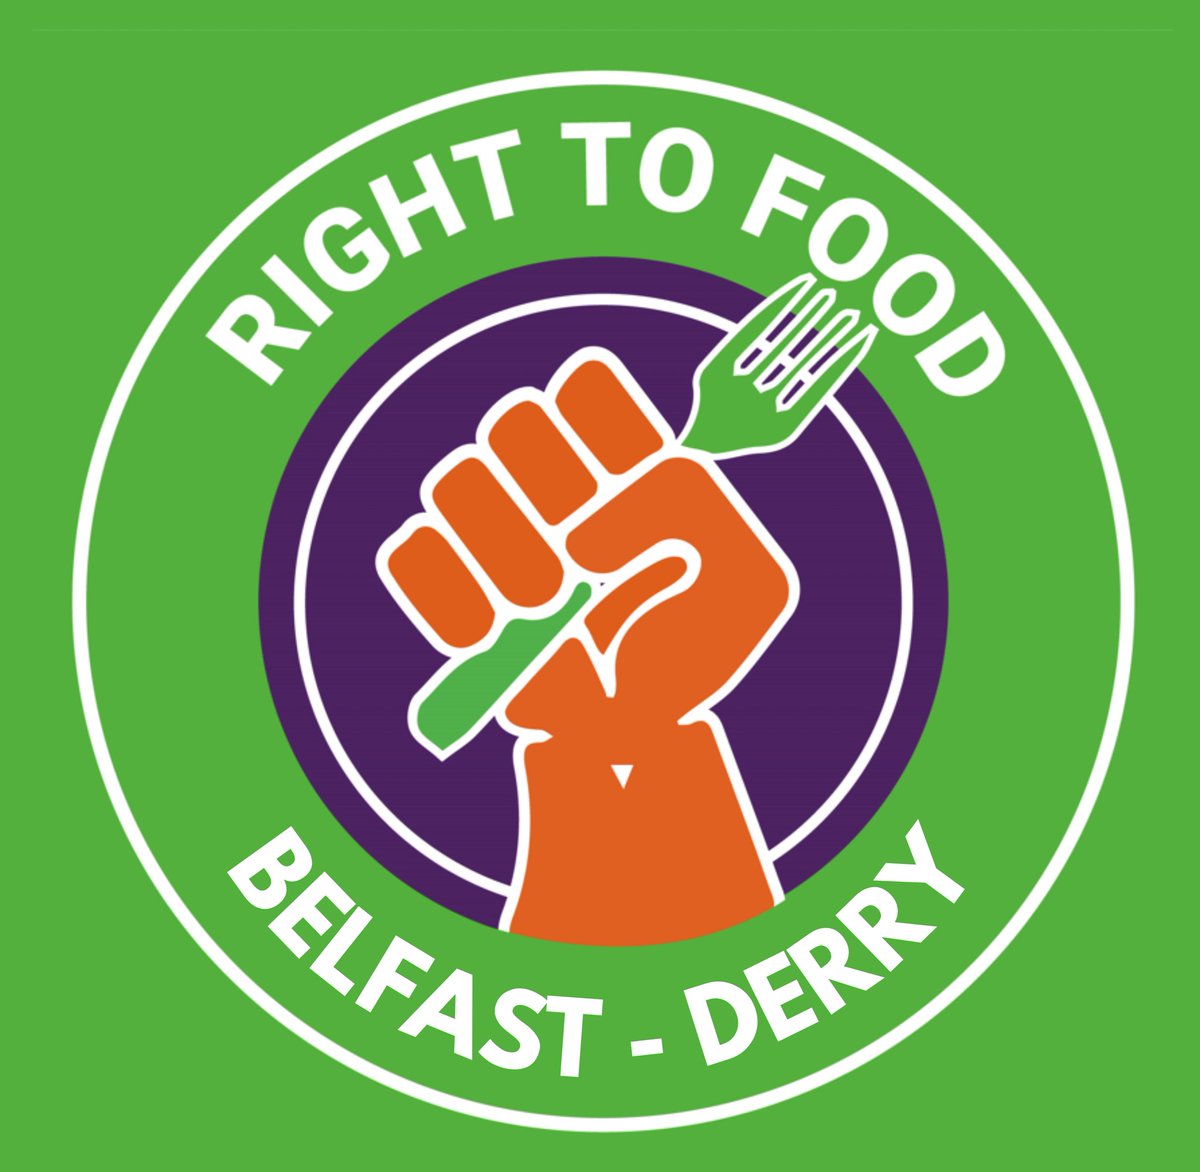 Derry has now joined Belfast as a #RightToFood city. Well done to my colleague Catherine McDaid for bringing forward this motion.  

Our campaign will keep going until we end hunger in our communities and ensure access to food is a legal right for all!

#HungerIsAPoliticalChoice